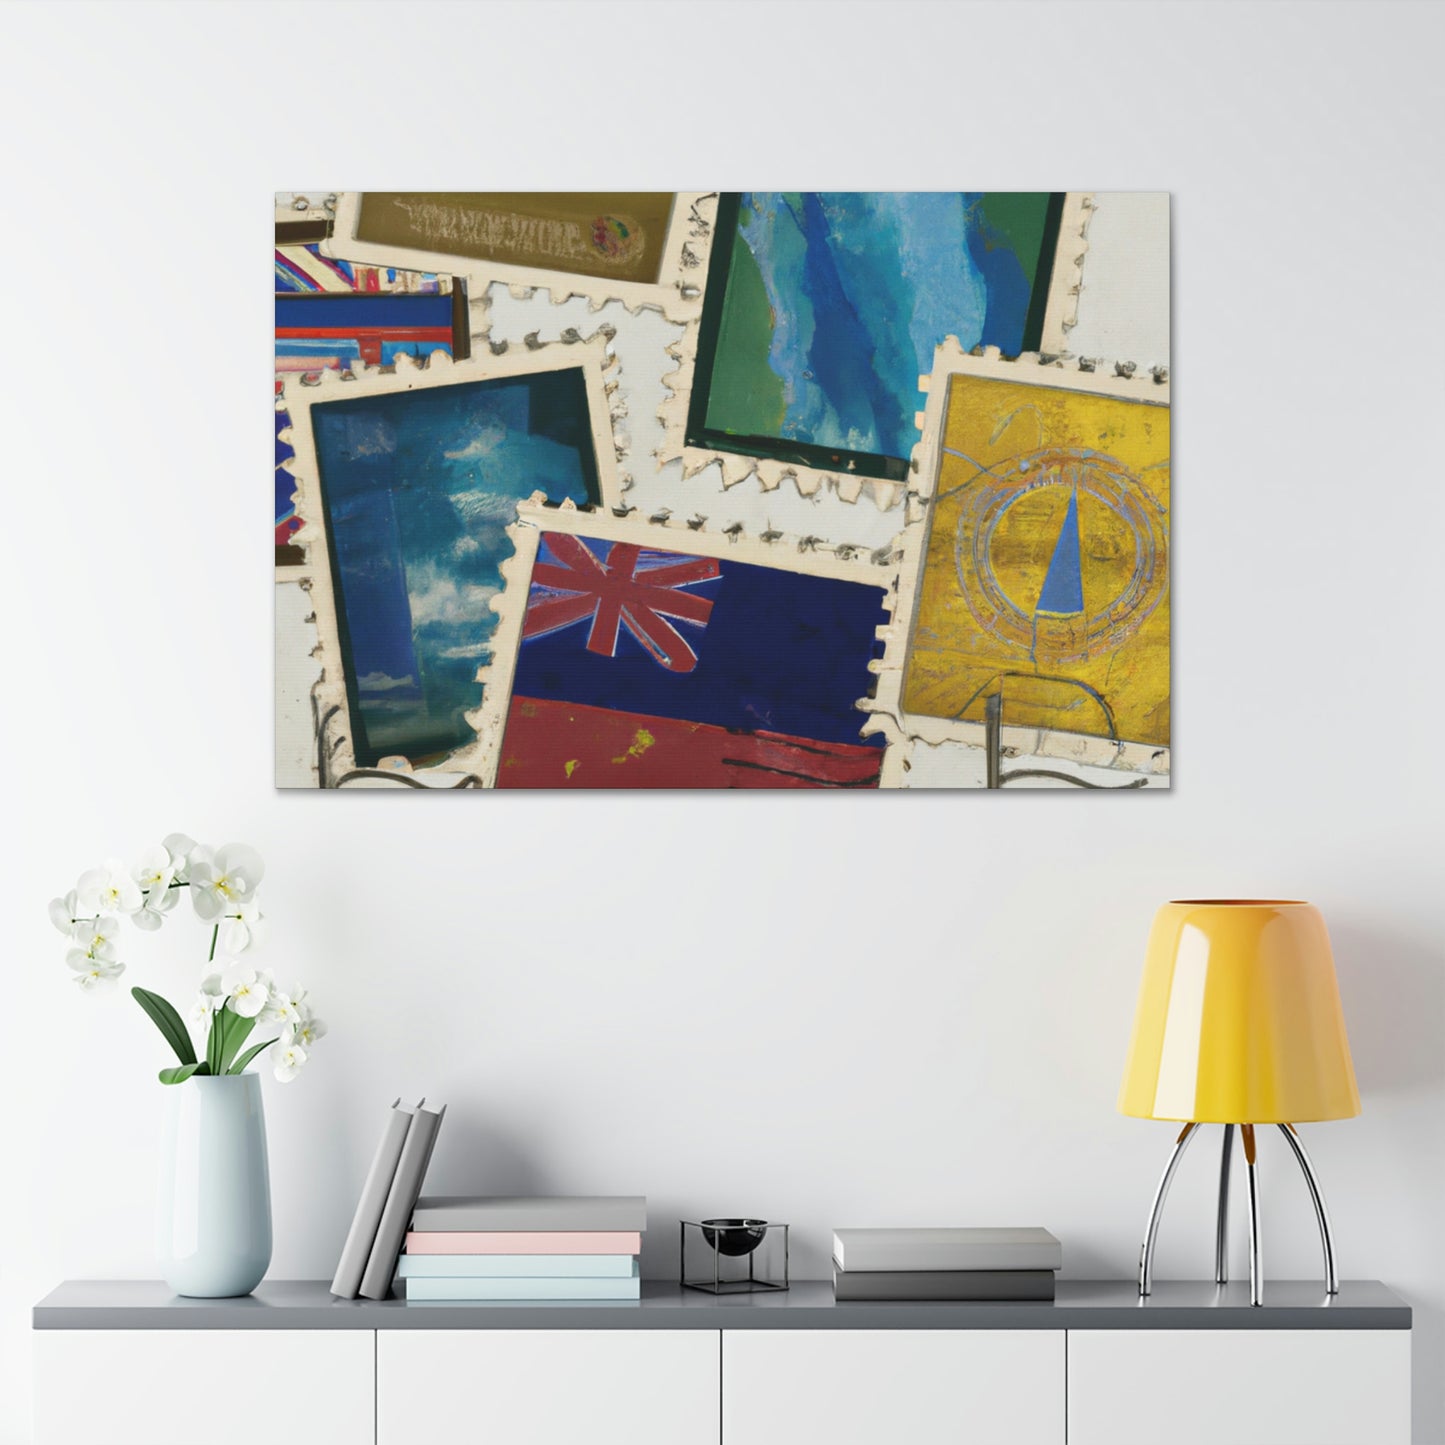 UniStamps: A Celebration of Unity. - Postage Stamp Collector Canvas Wall Art